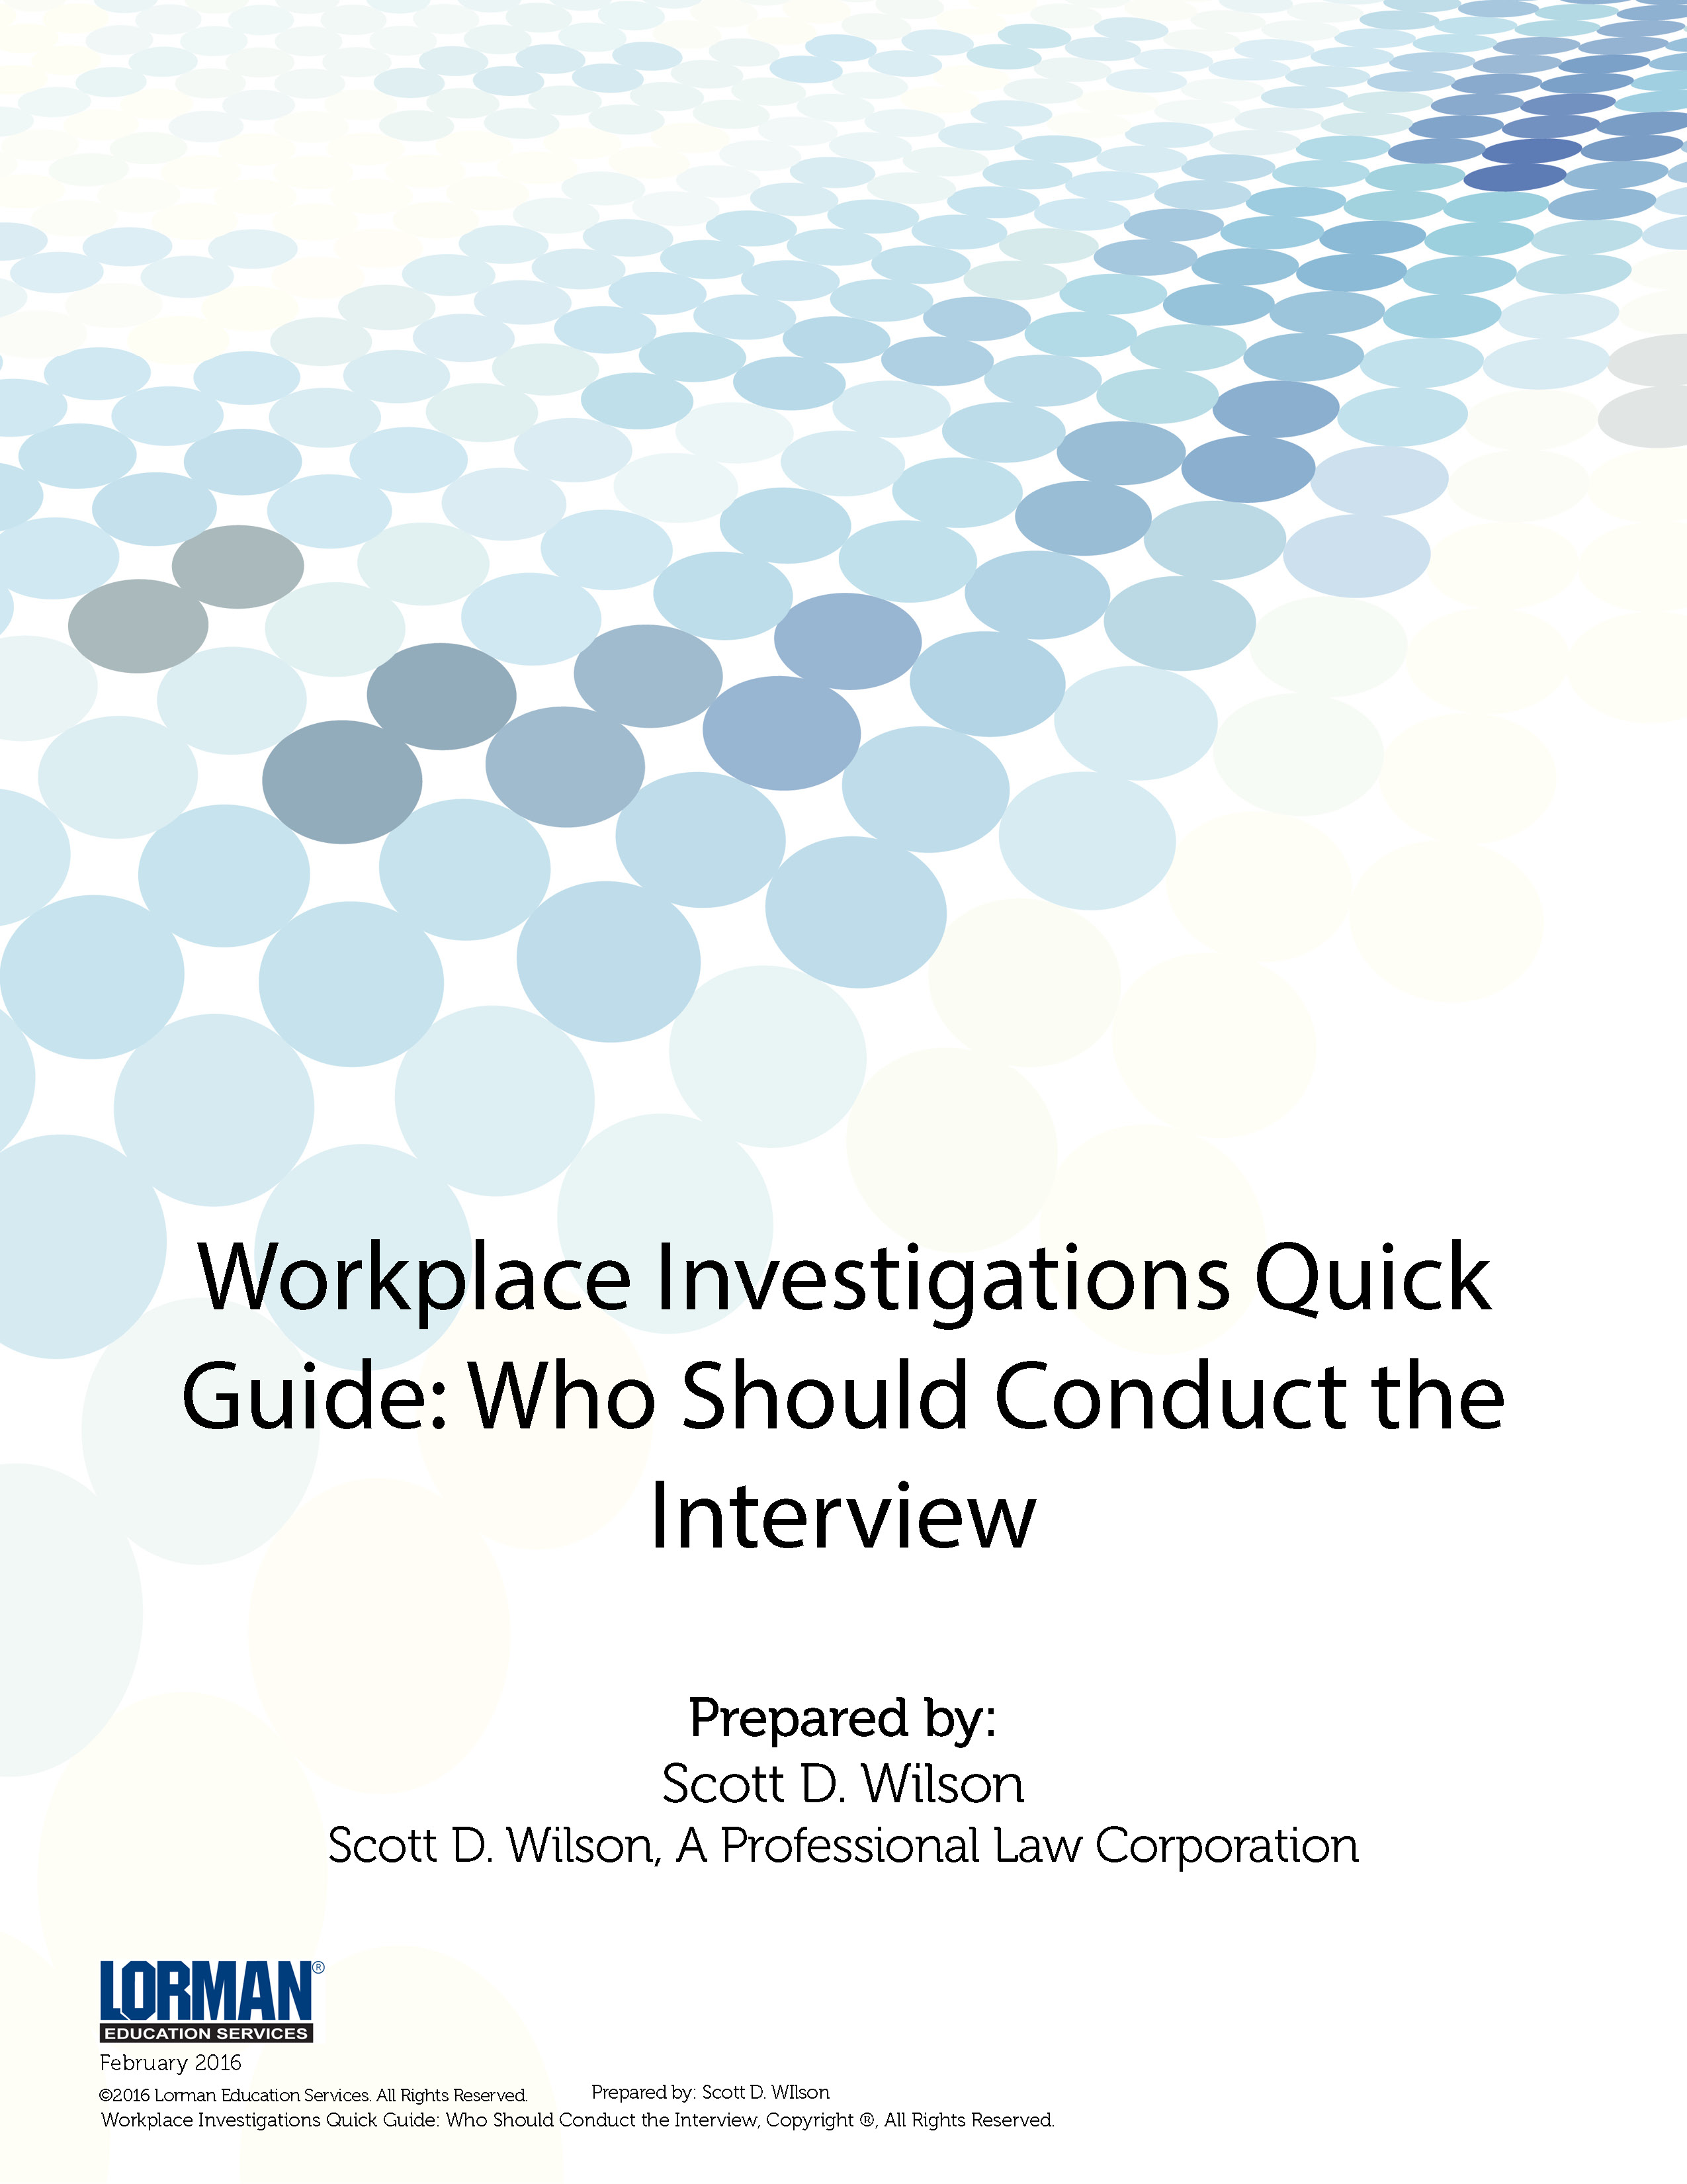 Workplace Investigations Quick Guide: Who Should Conduct the Interview